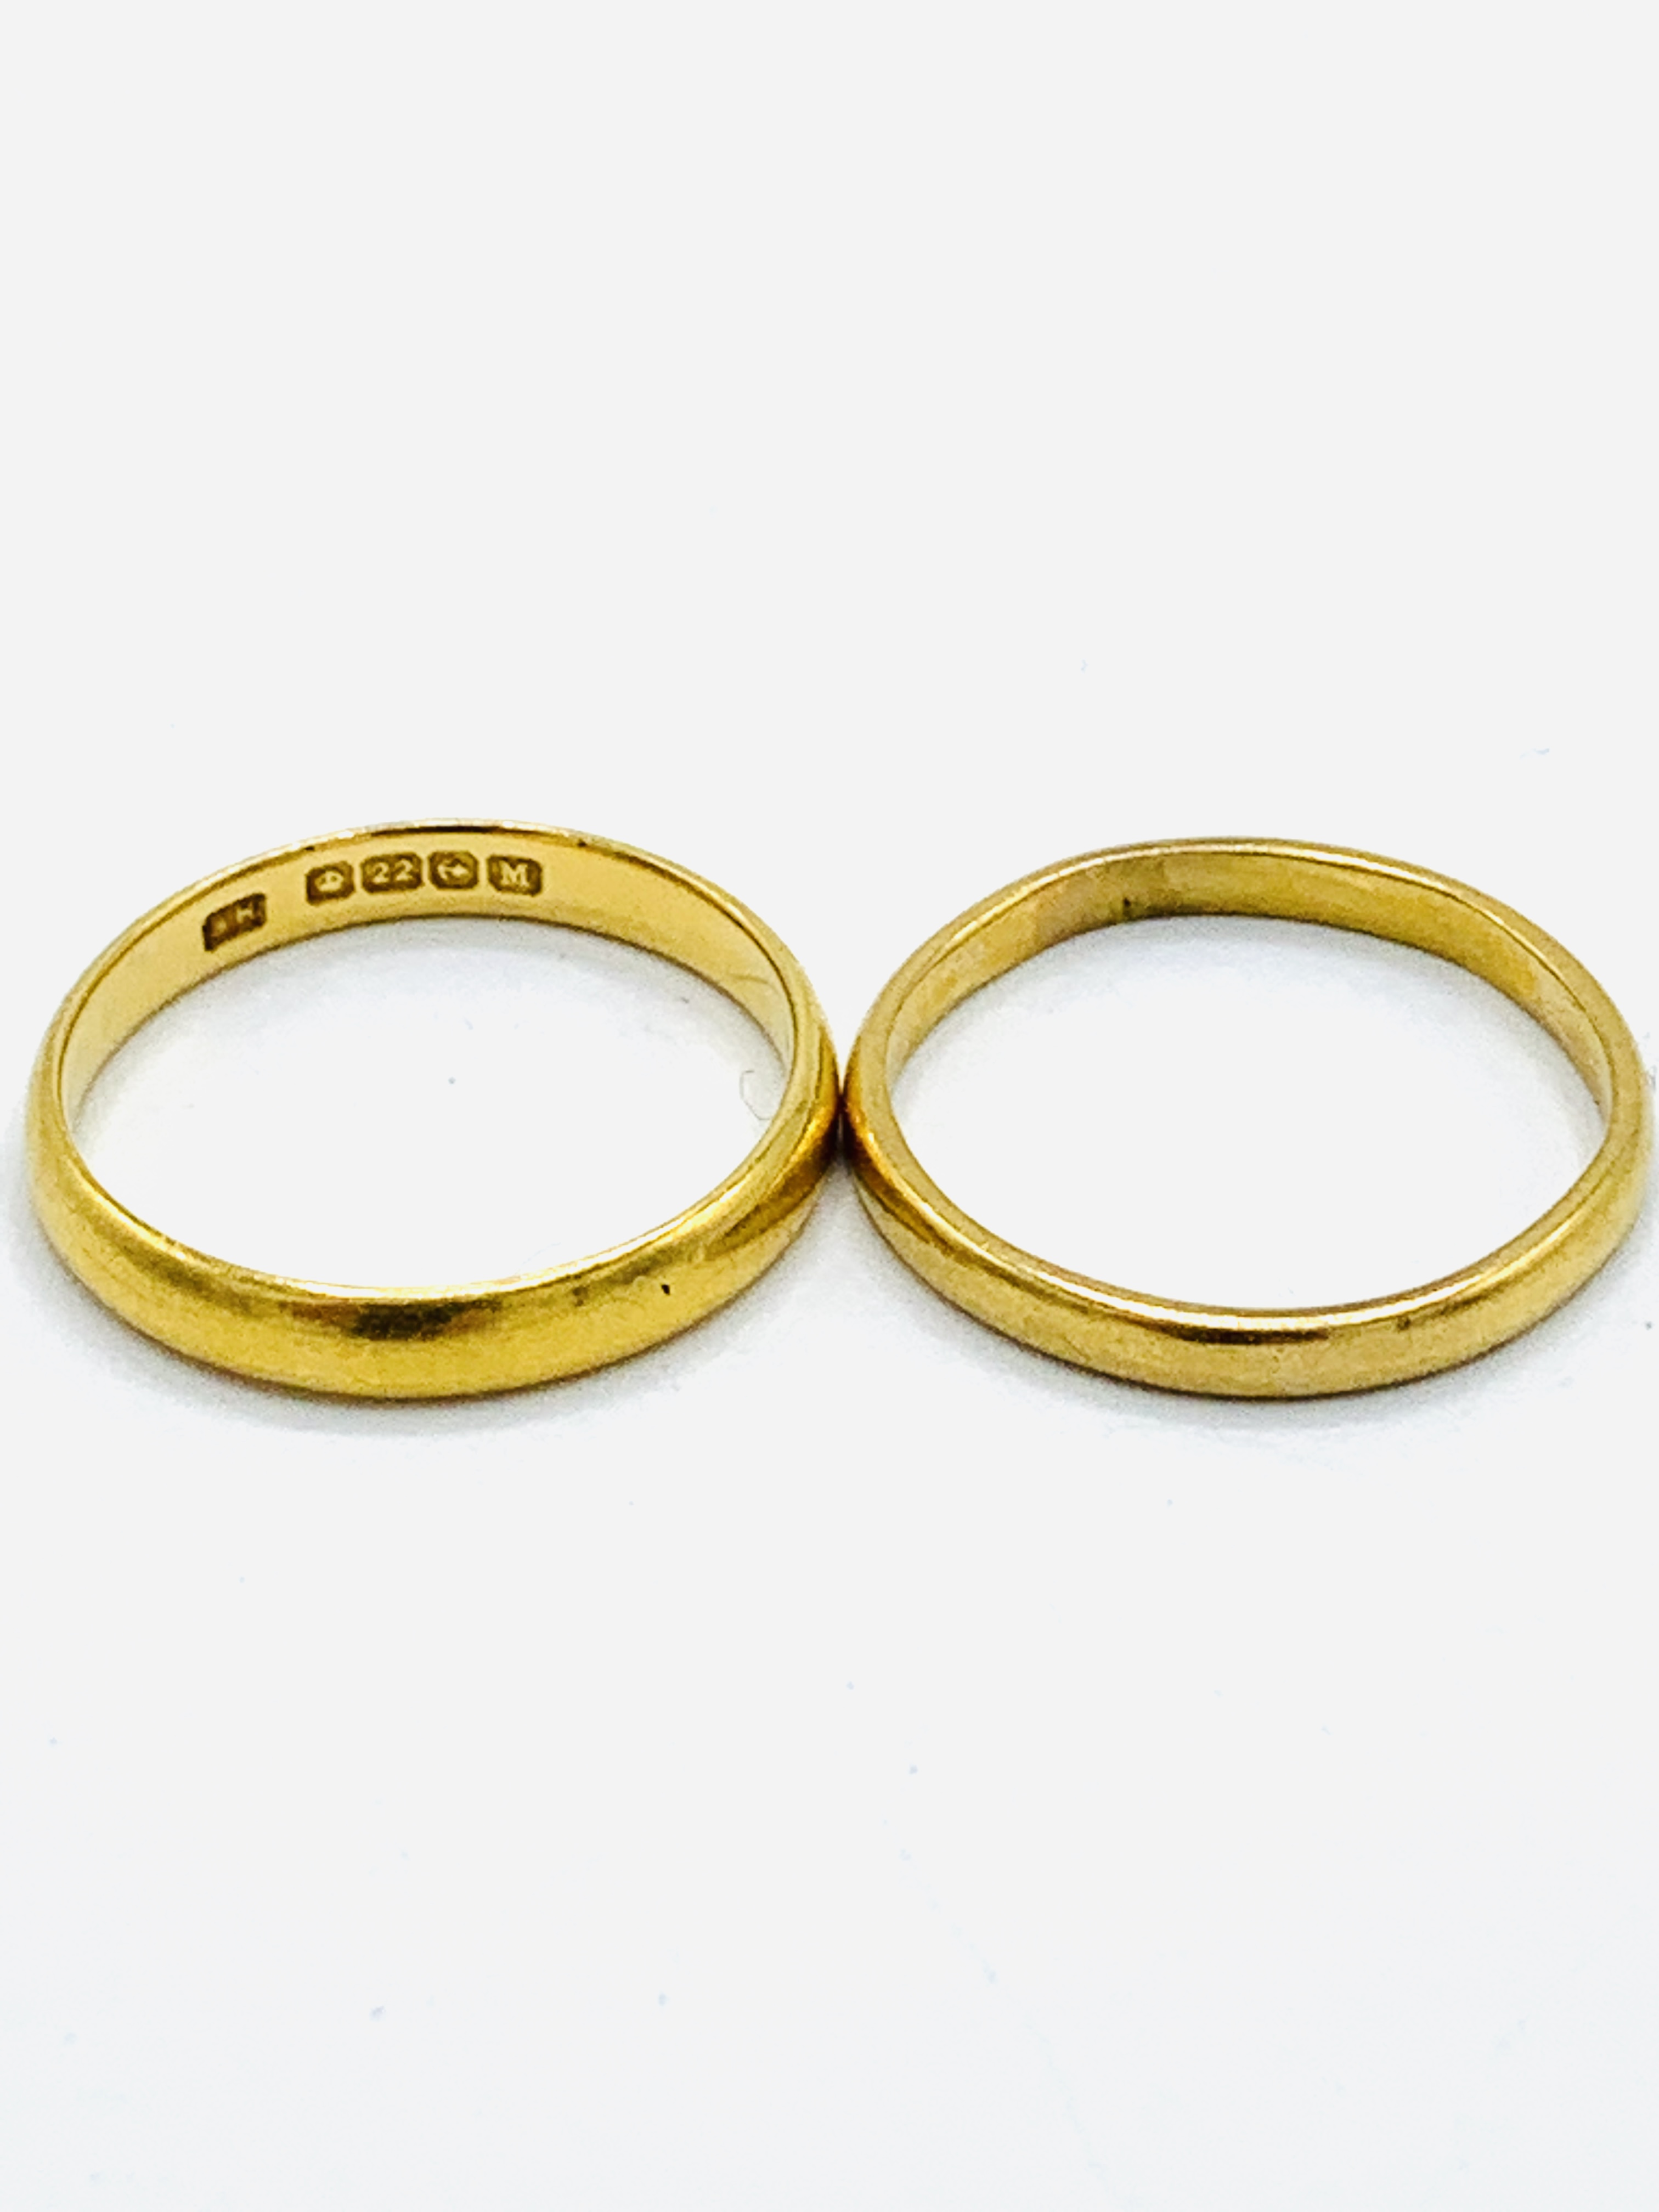 Two 22ct gold bands - Image 2 of 3